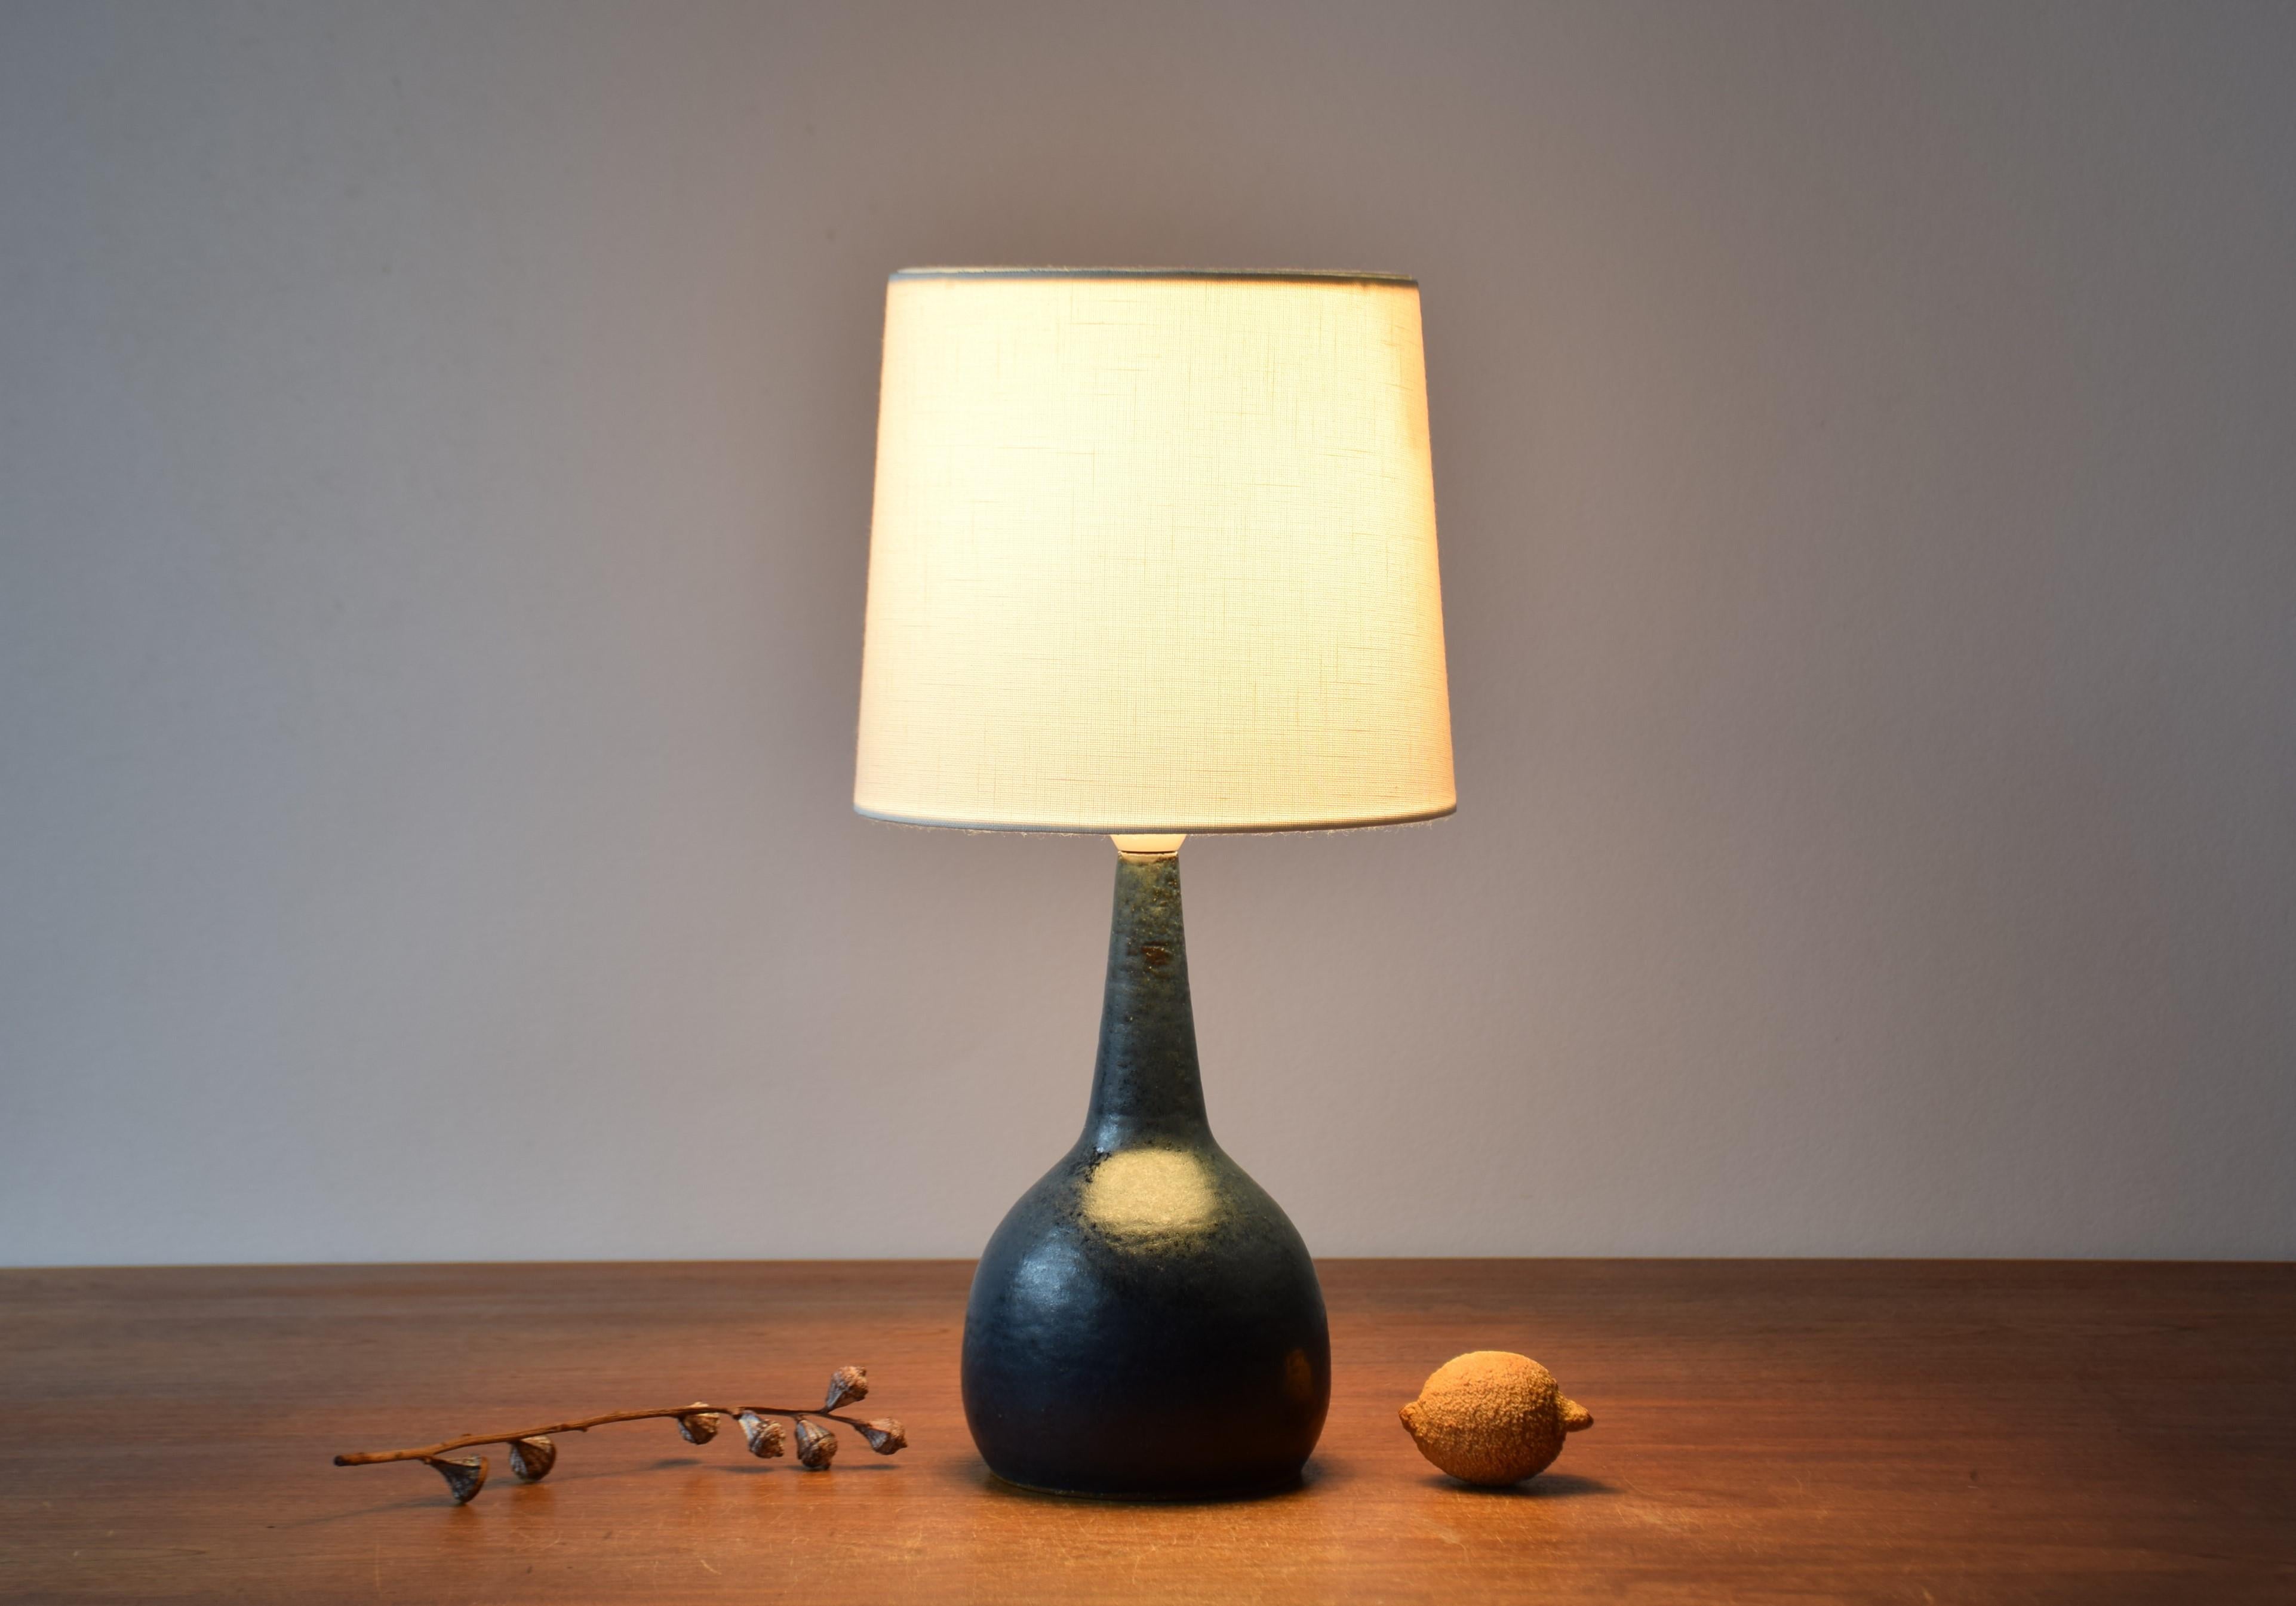 Sculptural Danish Mid-century ceramic table lamp designed by Per Linnemann-Schmidt for Palshus. Made circa 1960s. 

The lamp is made from chamotte clay and covered by a midnight blue glaze with brown elements. It is partly matte, partly glossy. Very